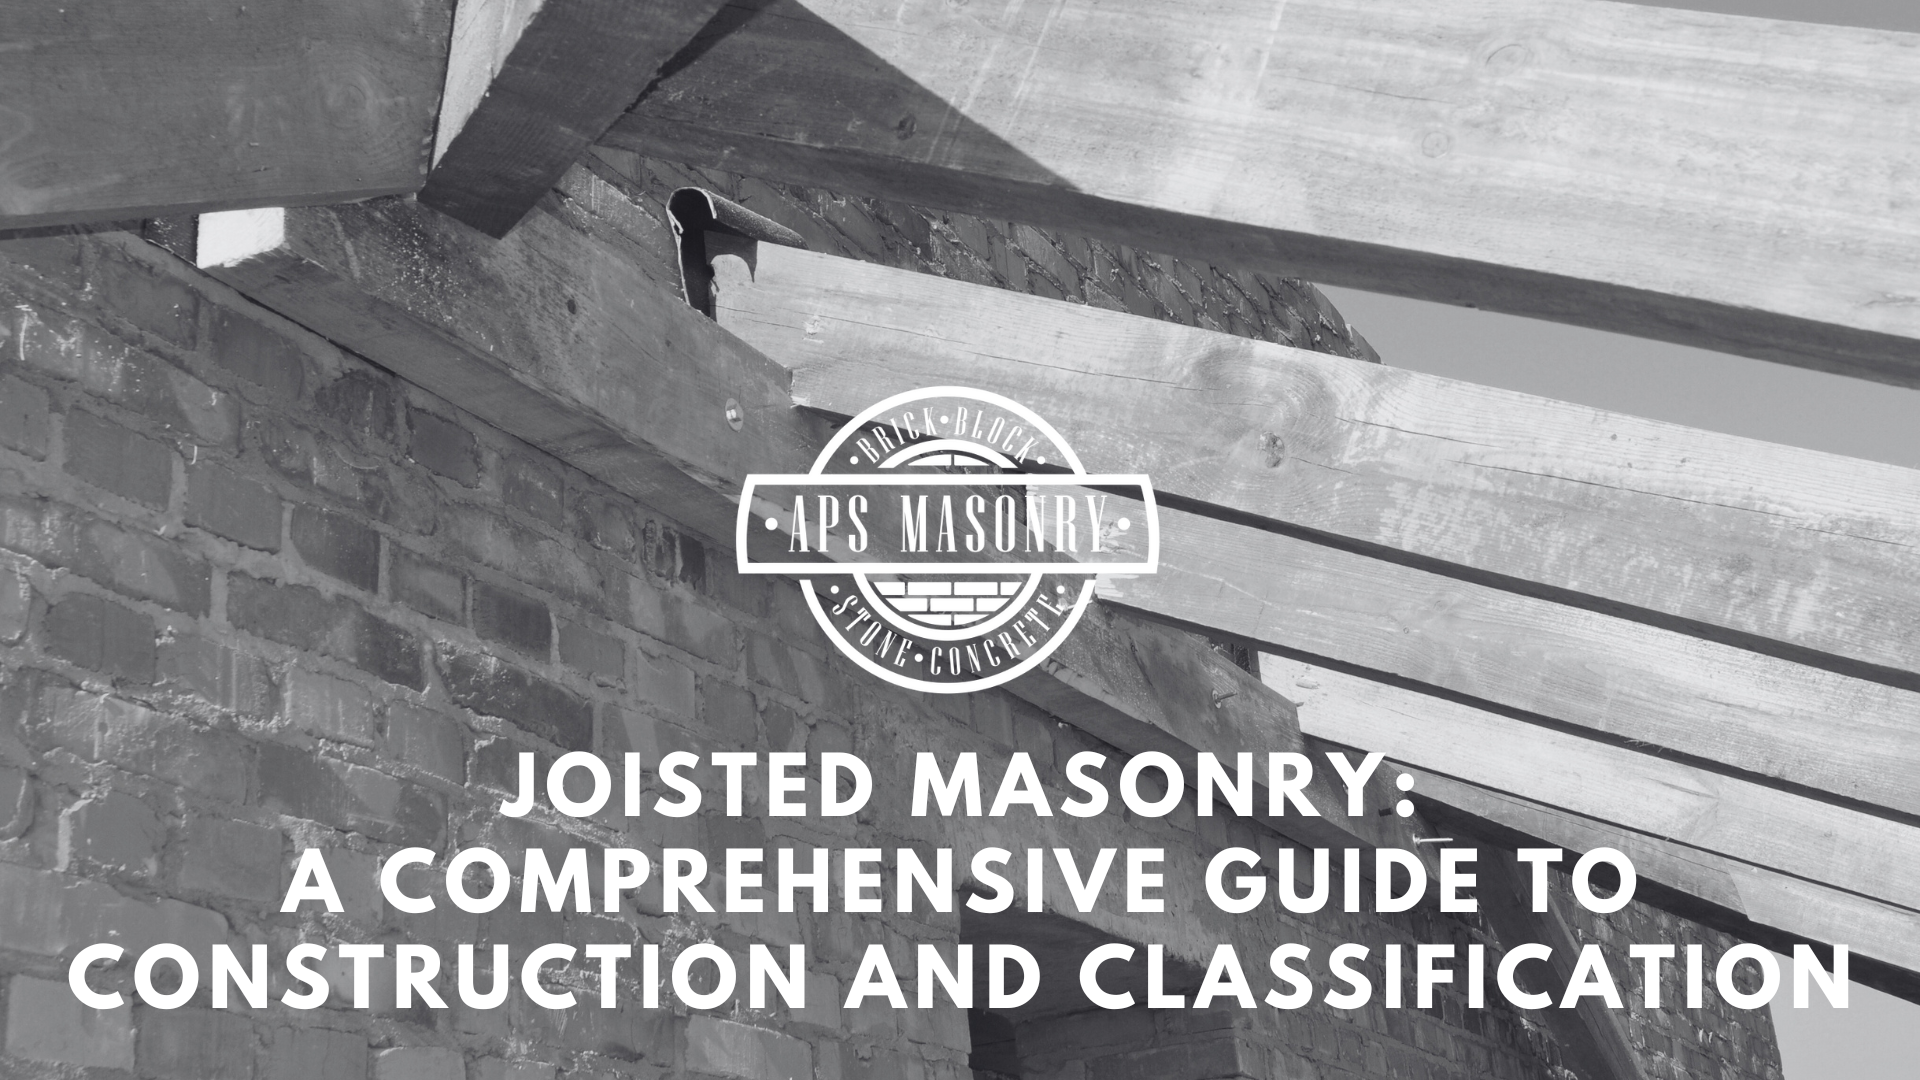 Joisted Masonry: A Comprehensive Guide to Construction and Classification